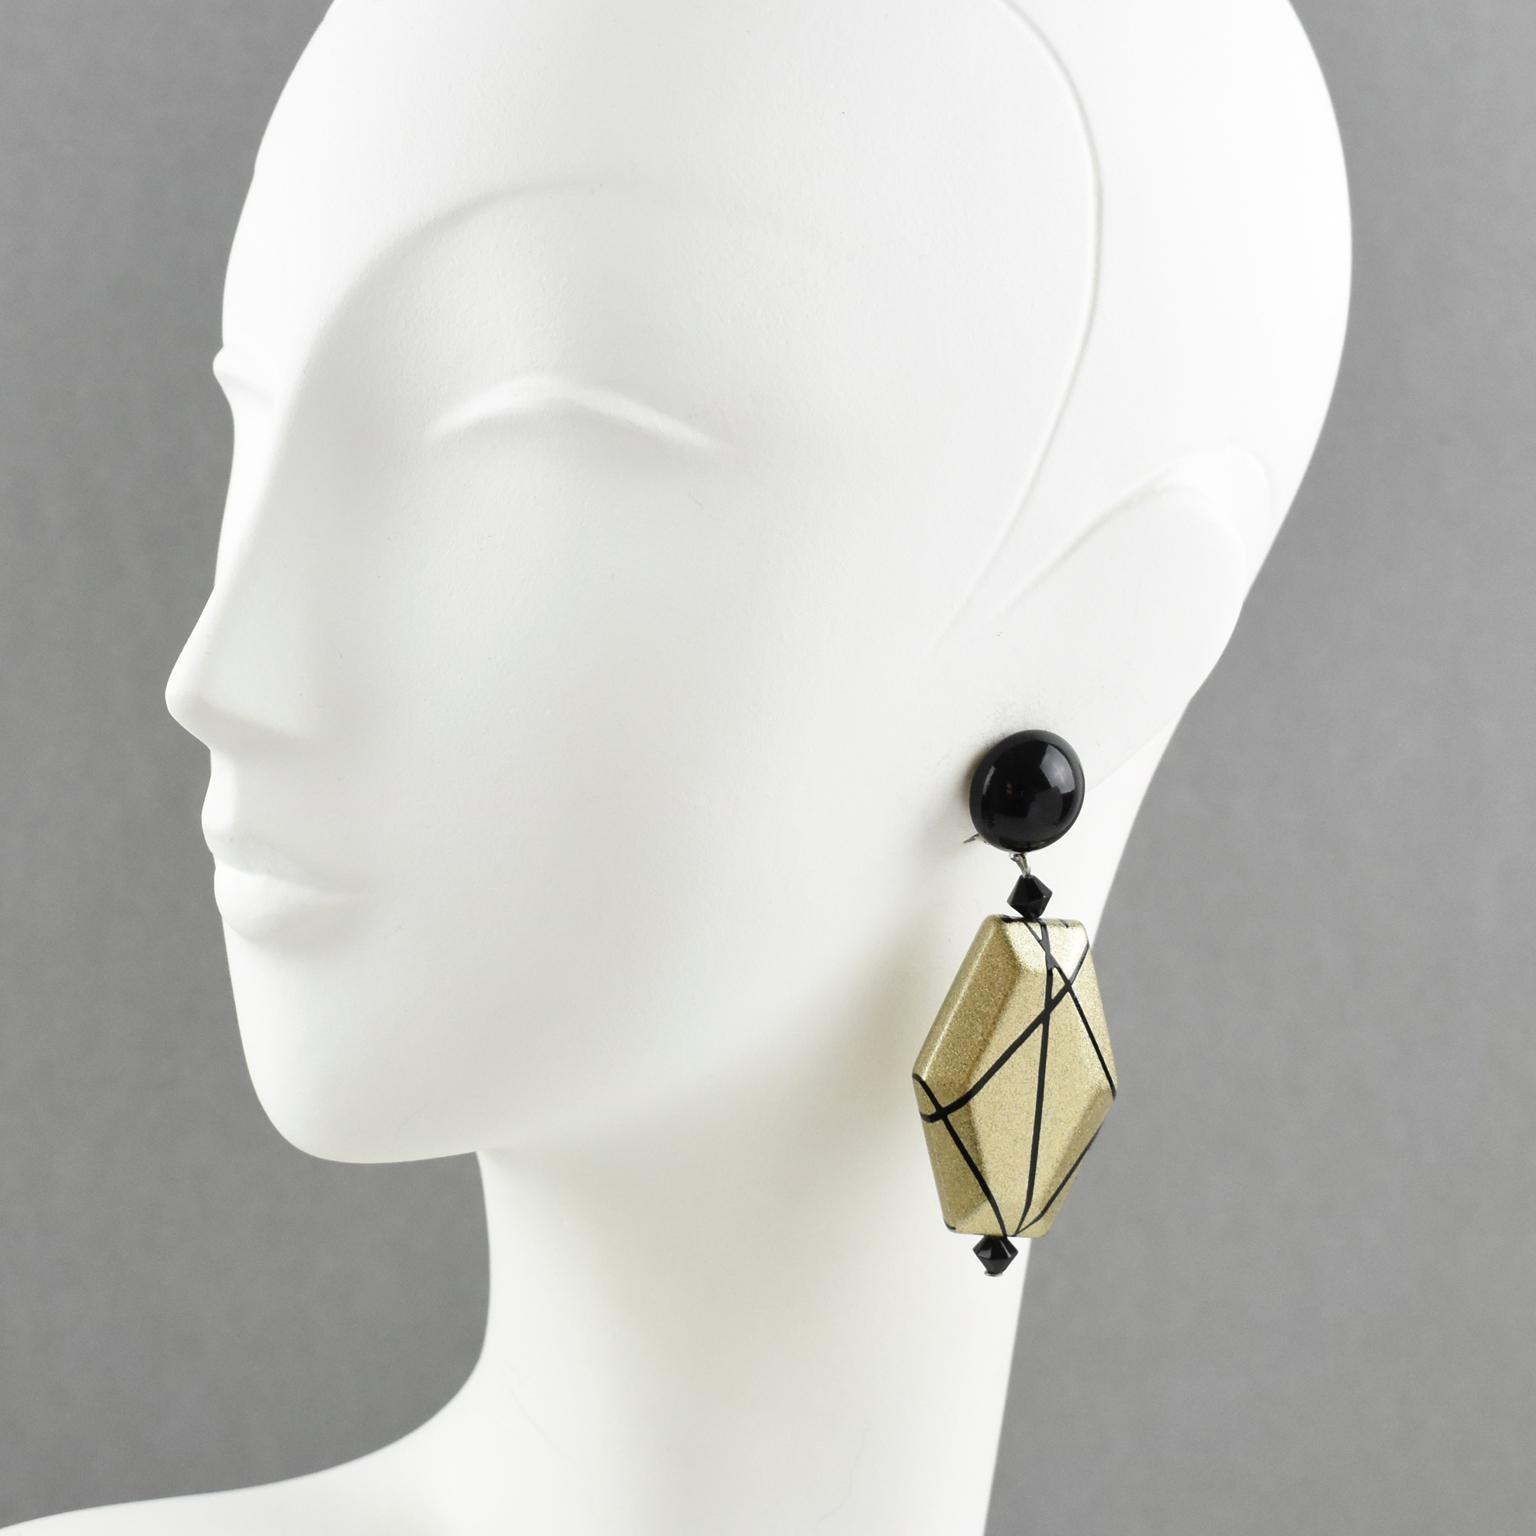 Stunning Angela Caputi, made in Italy resin clip-on earrings. Dangling shape with black color contrasted with pale gold resin geometric pebble bead all wrapped around with black lines. 
As you know Caputi jewelry is not signed. This is a pre-owned